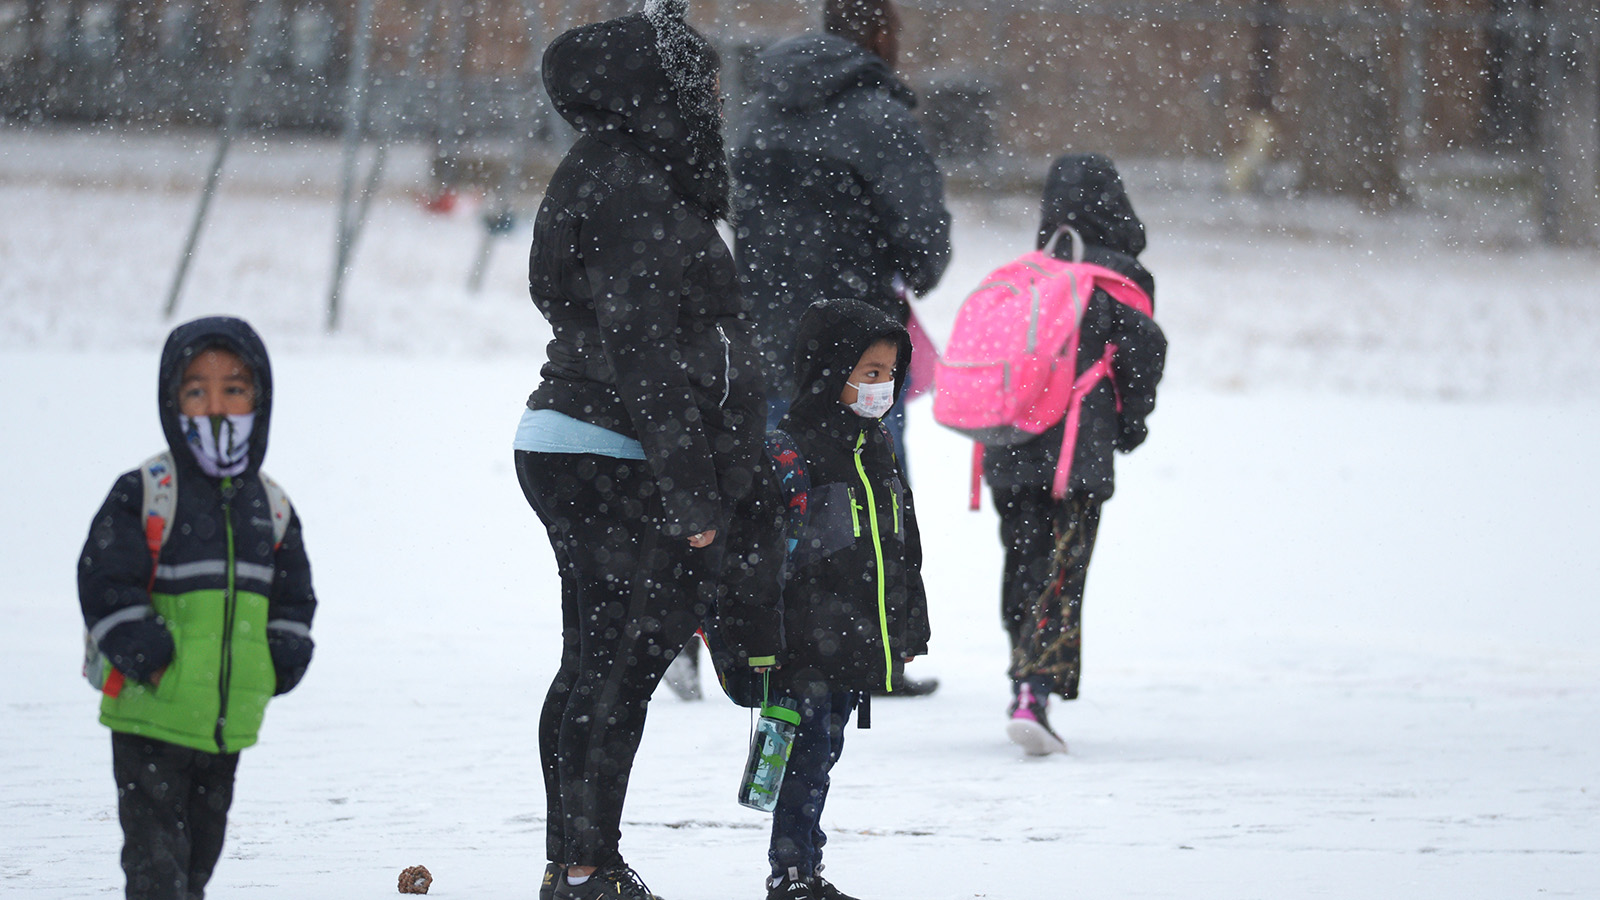 Students outside Rose Hill Elementary School in Commerce City on January 26, 2021.